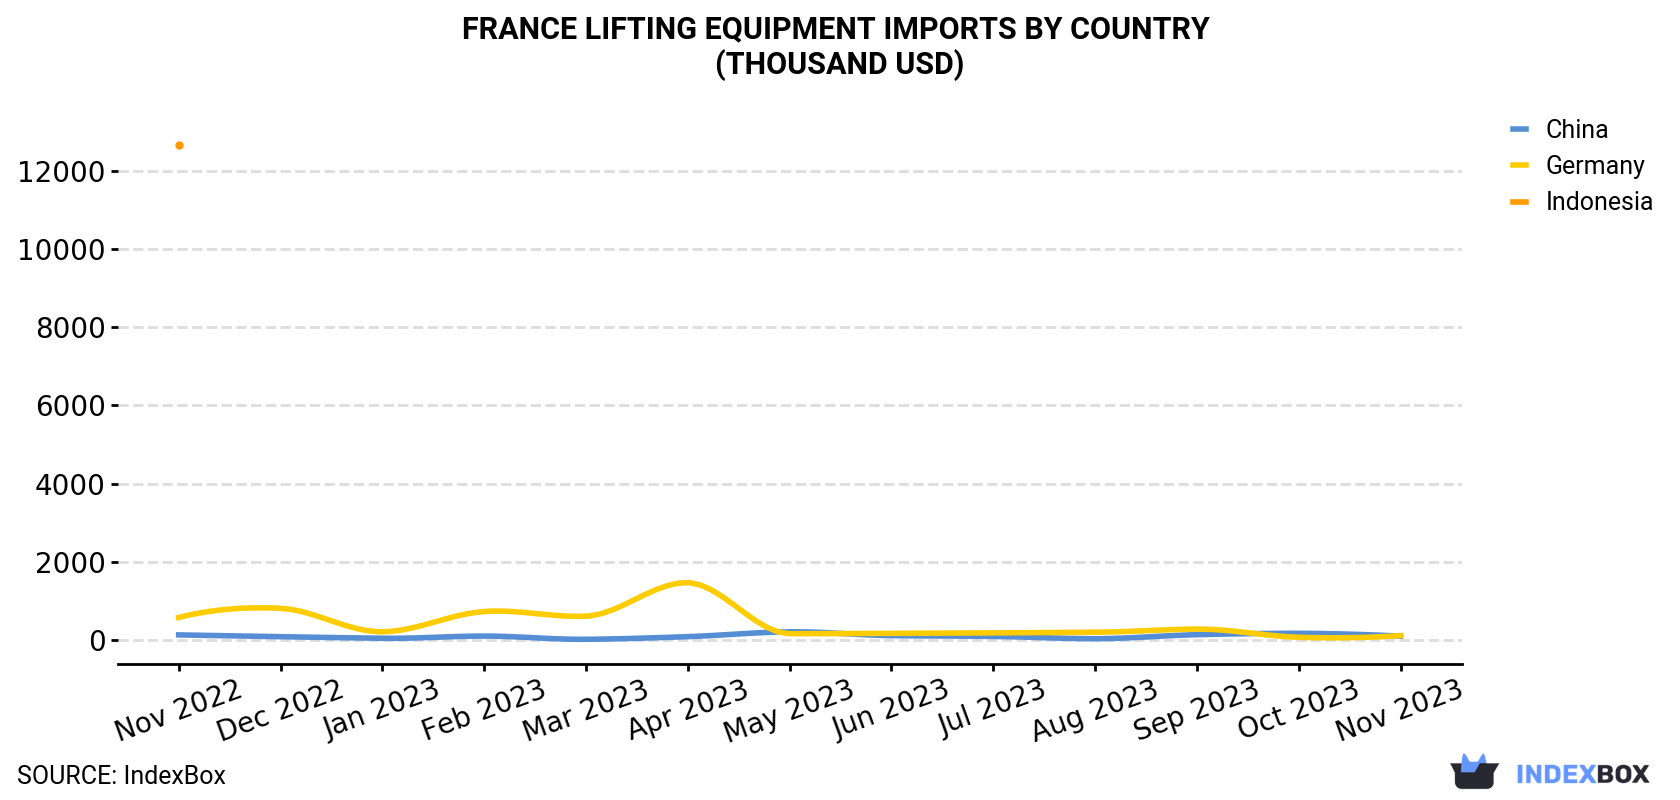 France Lifting Equipment Imports By Country (Thousand USD)